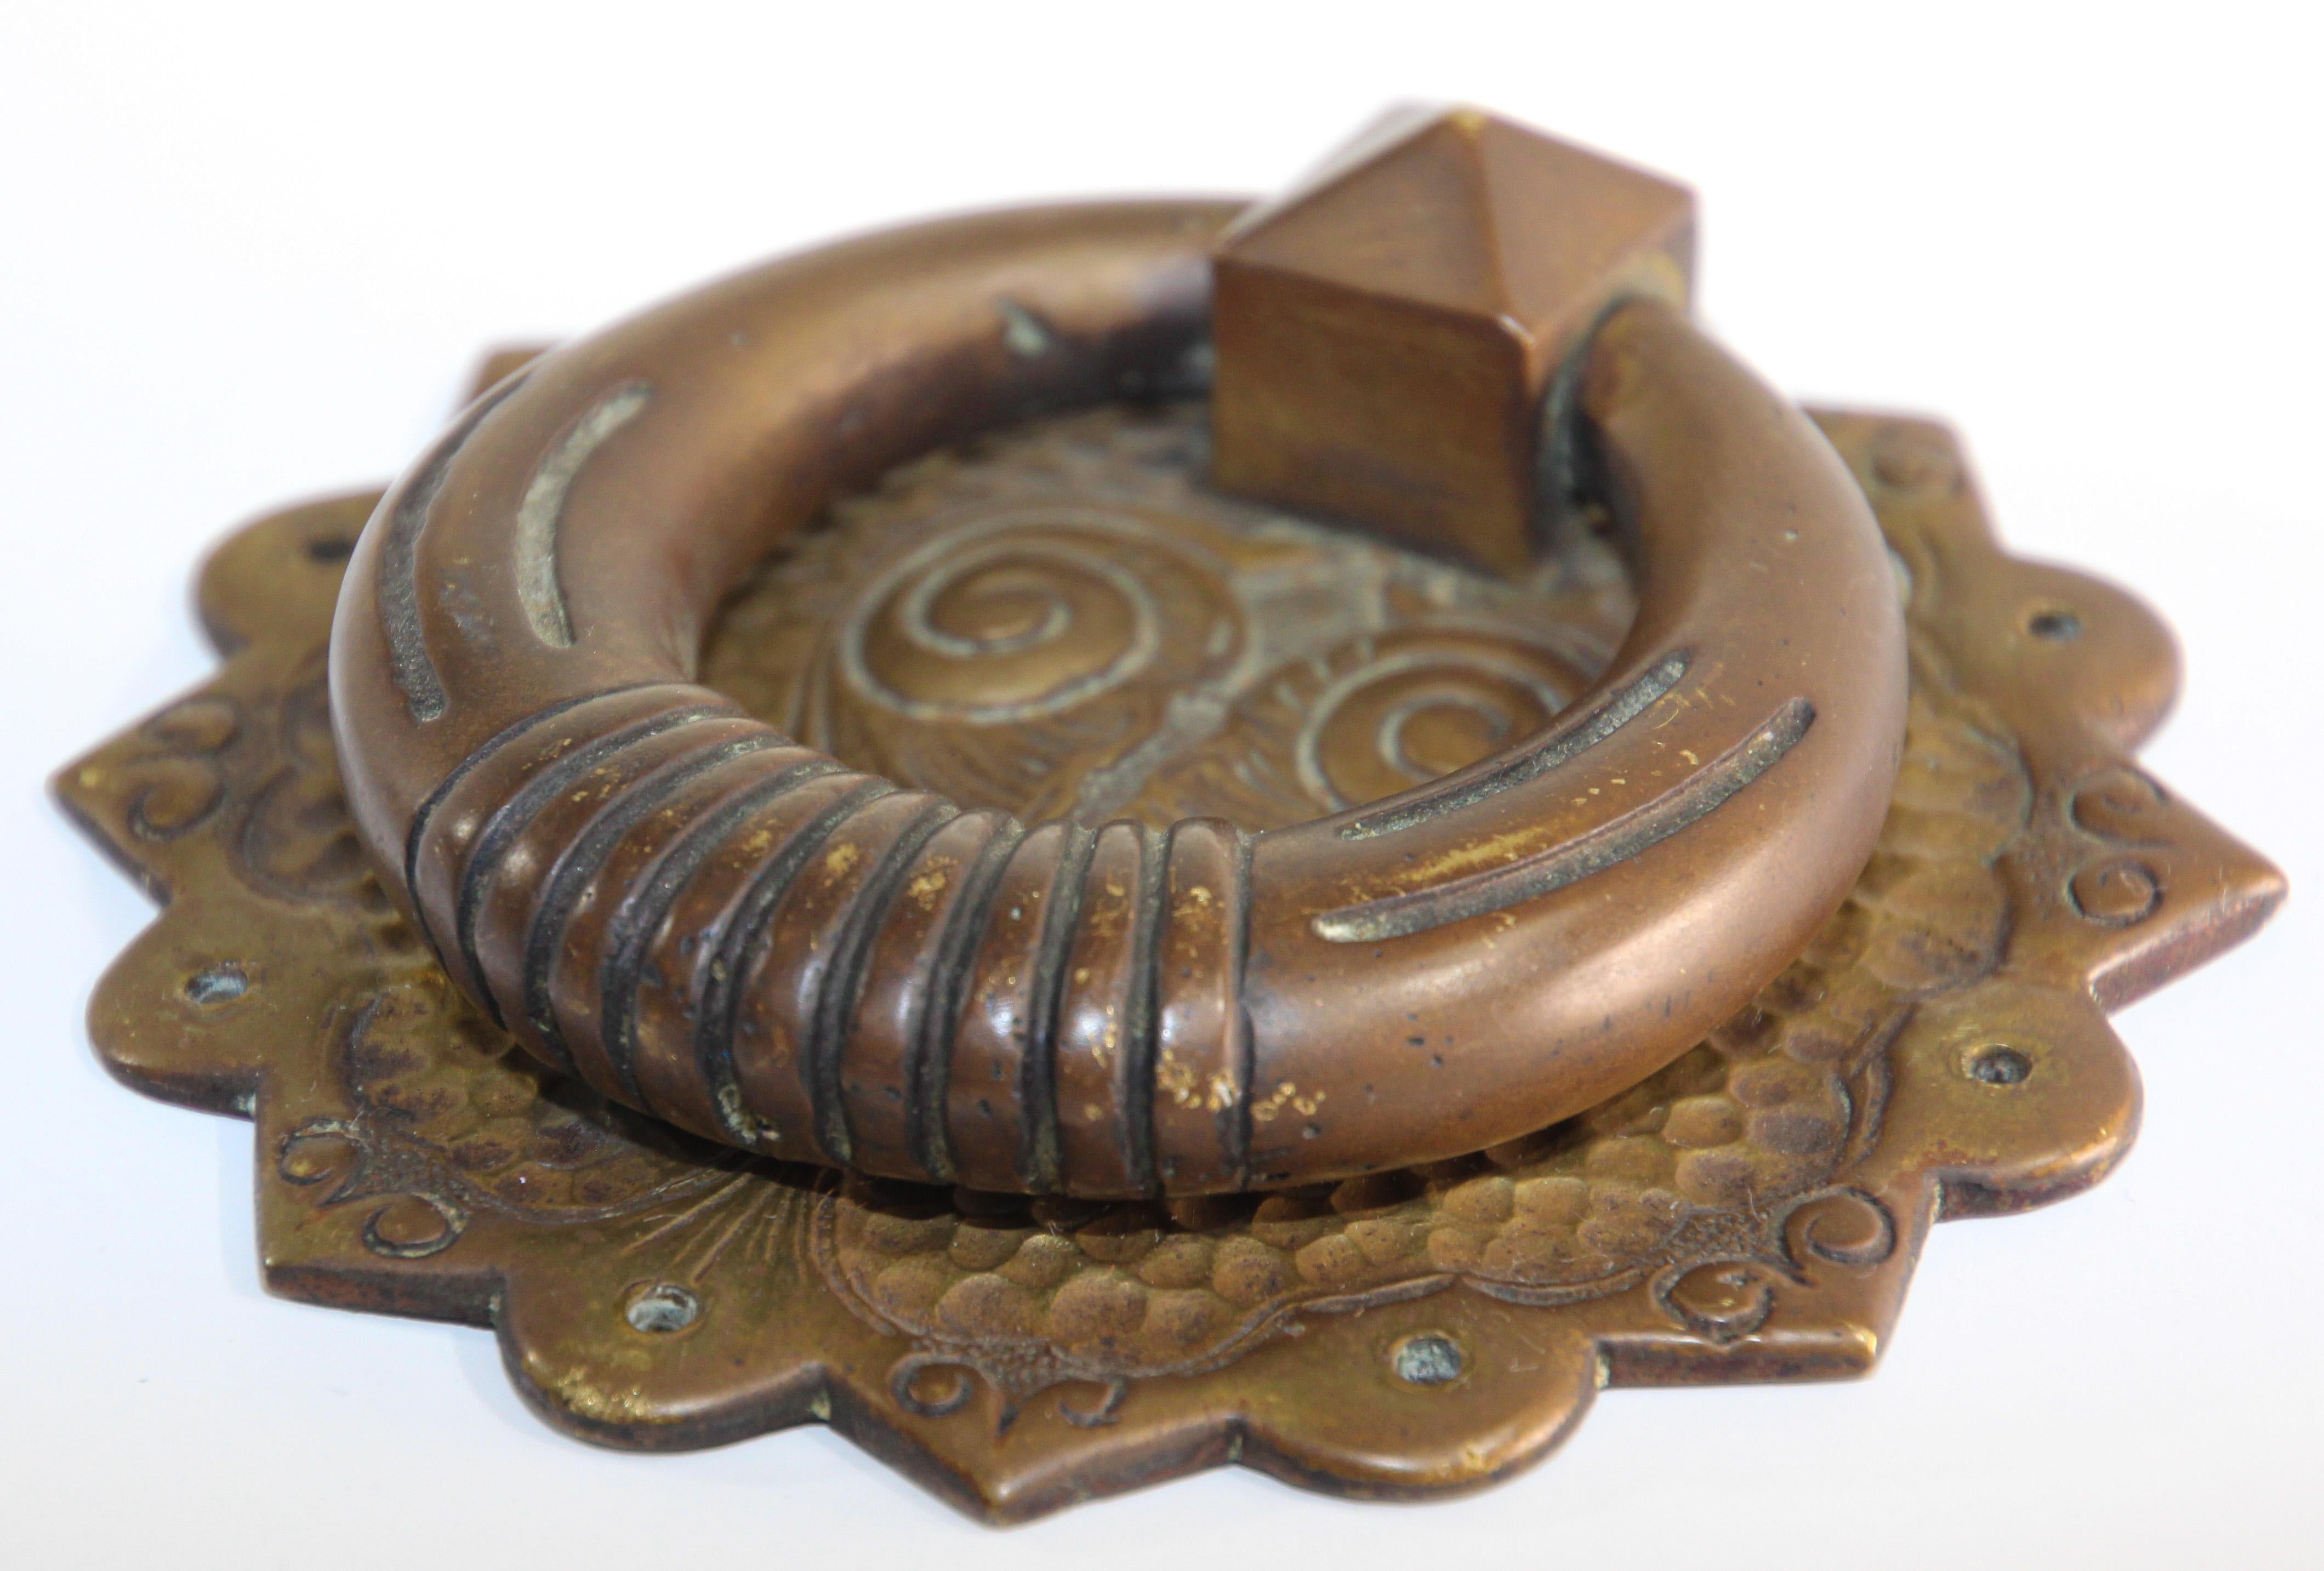 Vintage Art Deco Bronze Door Knocker Hardware.
Vintage Art Deco bronze door knocker hardware.
Beautiful small metal decorative bronze door knocker in a round shape with an abstract face design in the middle of the plate. Dimensions 4.